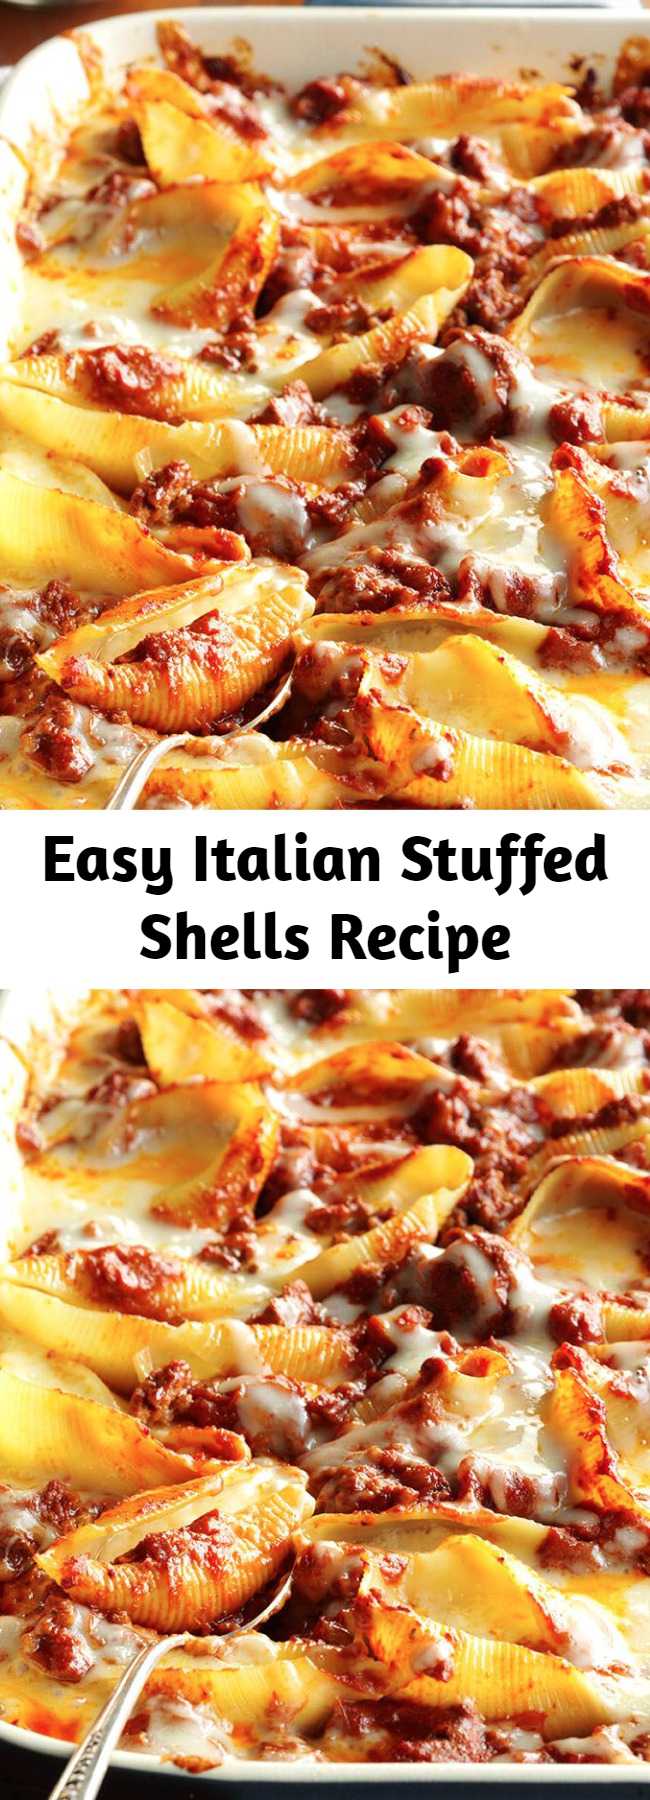 Easy Italian Stuffed Shells Recipe - A dear friend first brought over this stuffed shells recipe. Now I take it to other friends' homes and to potlucks, because it's always a big hit! Simple and delicious.